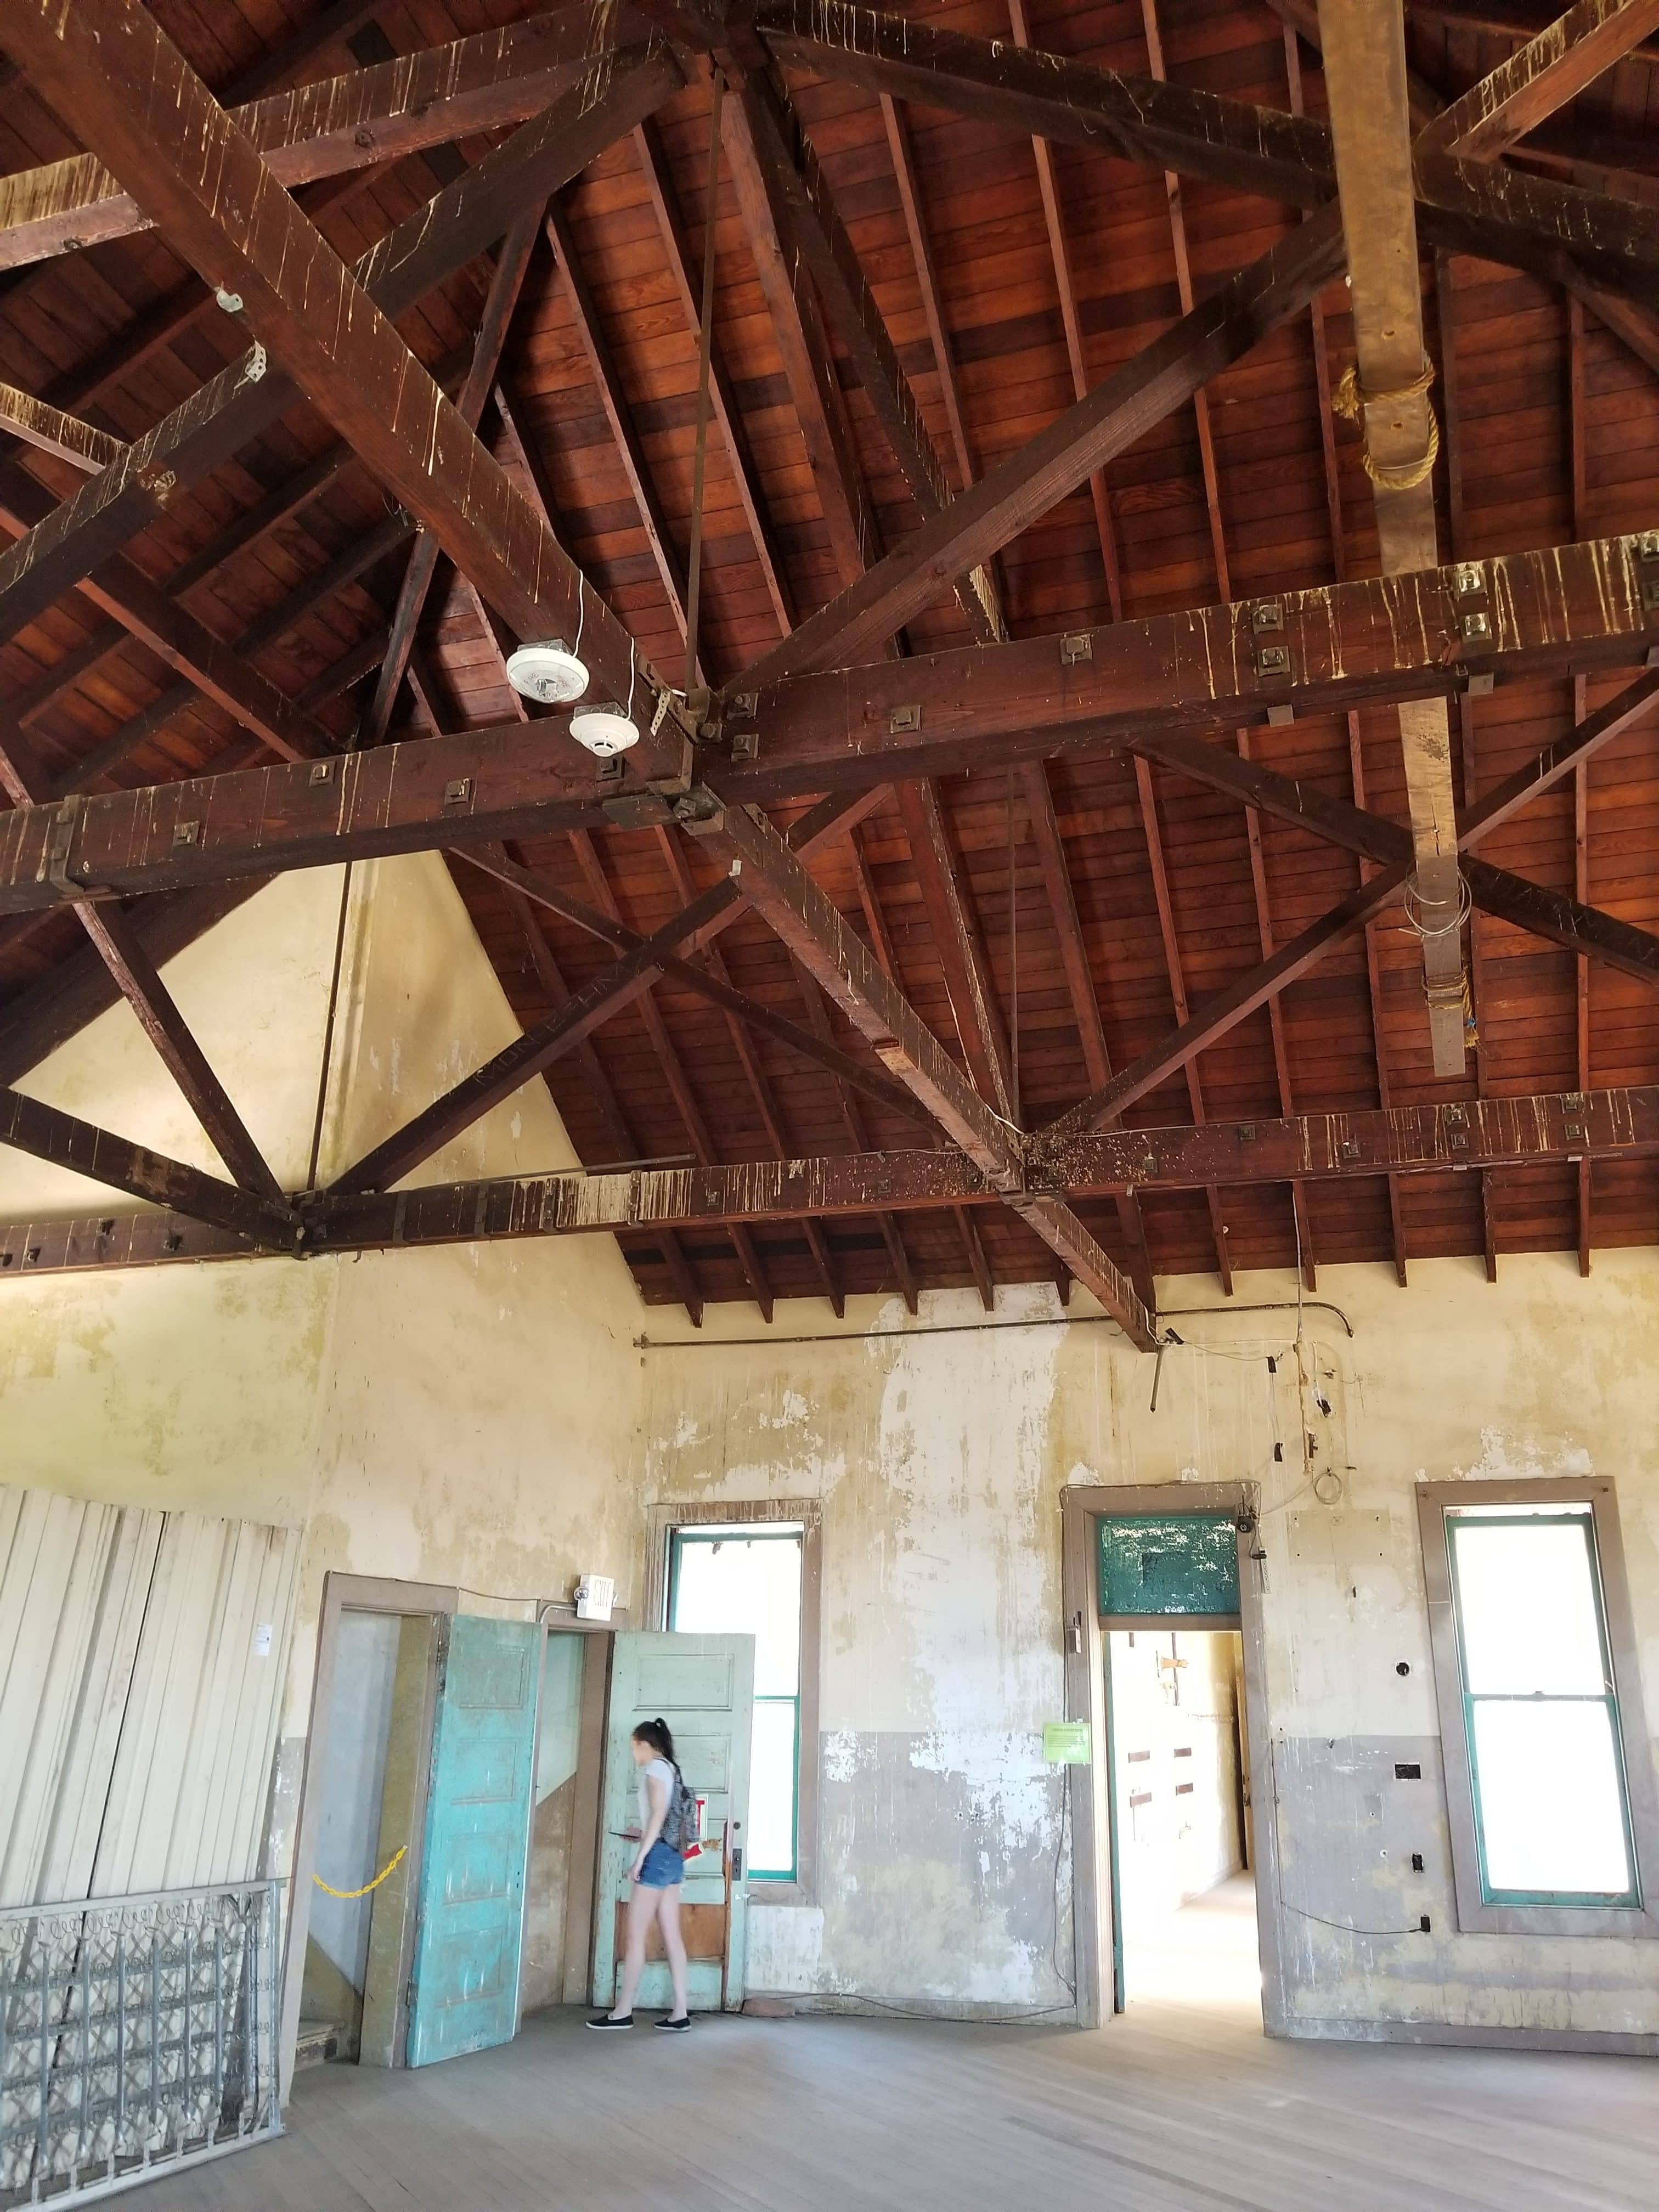 intricate beam and rafter system above the dormitory floor